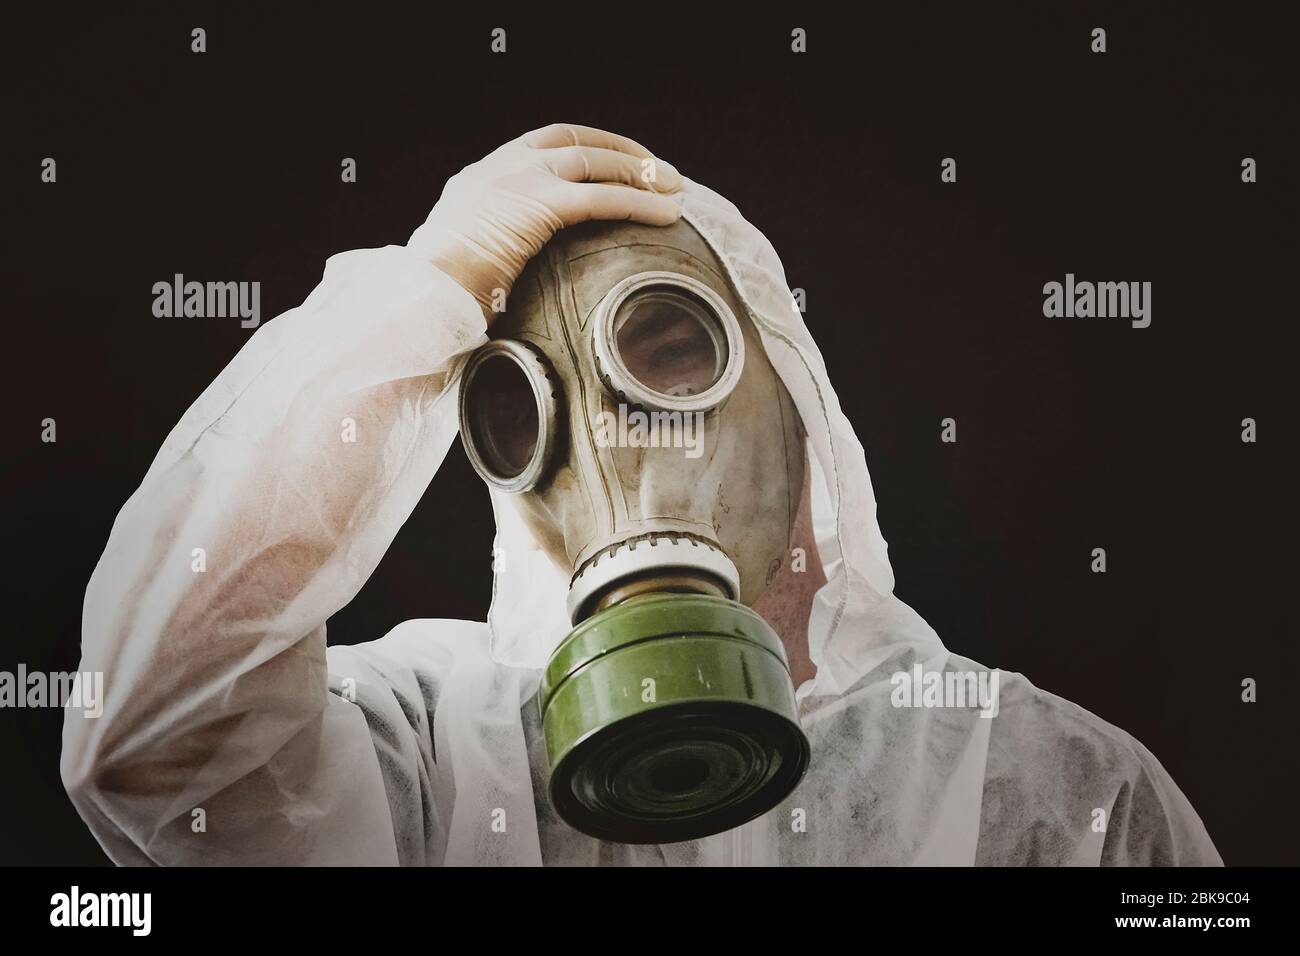 virus infection concept. Man in protective suit and antigas mask on dirty black background. Ebola, toxic gases, biological warfare, coronavirus, infec Stock Photo